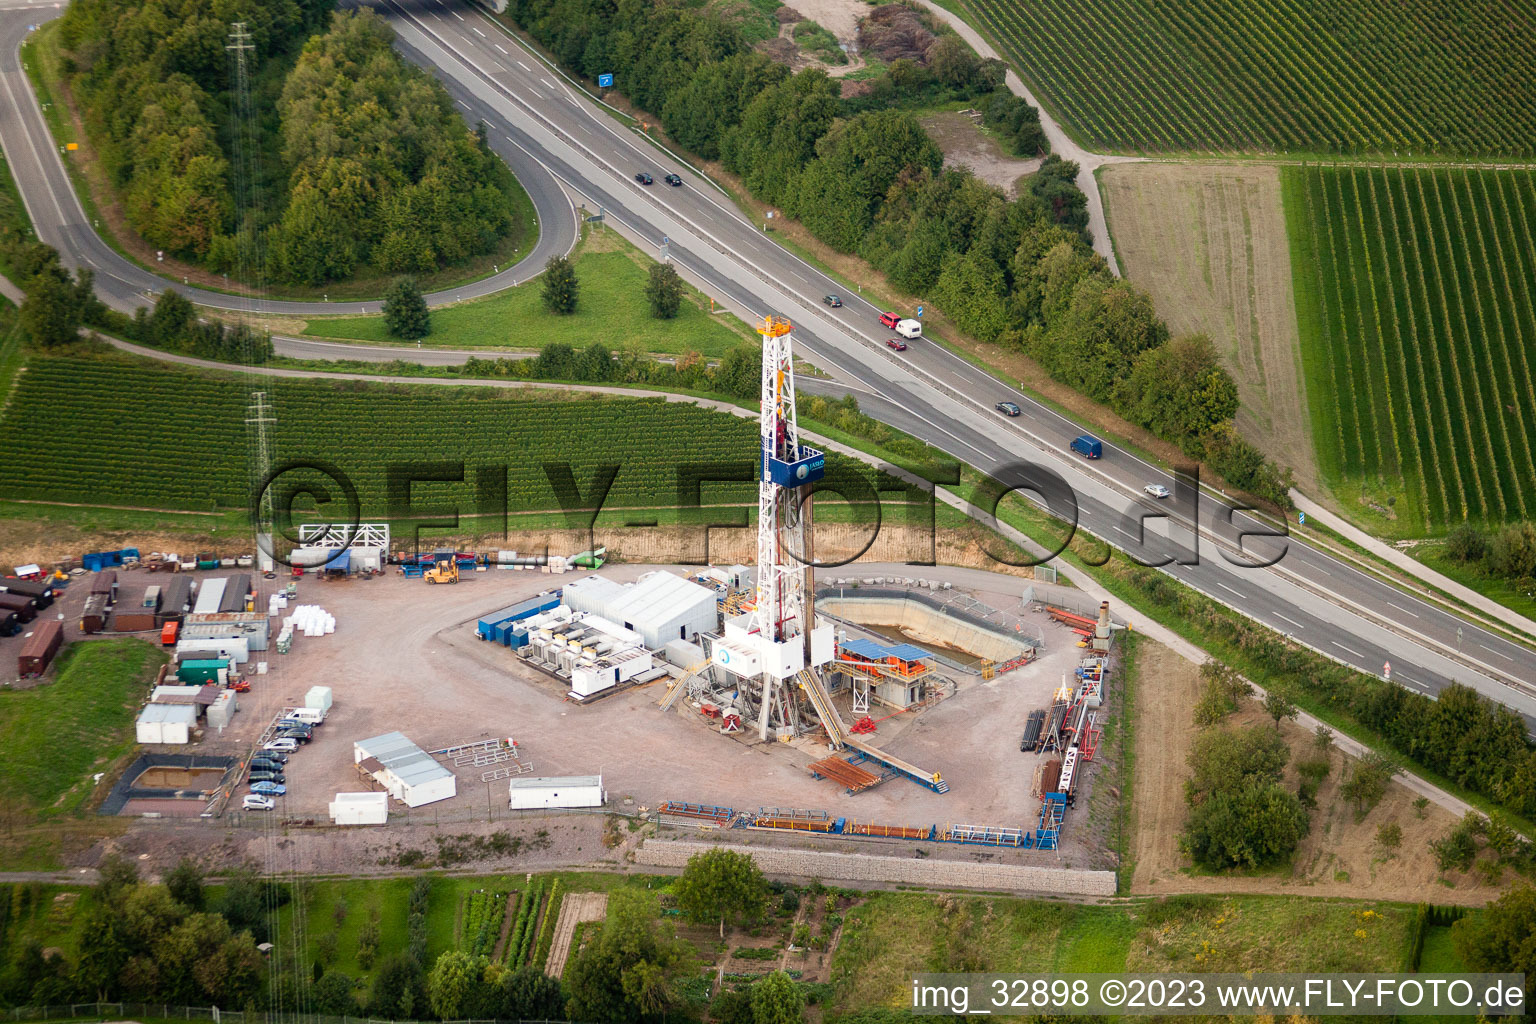 Aerial view of Geothermal system on the A65, 2nd borehole in Insheim in the state Rhineland-Palatinate, Germany